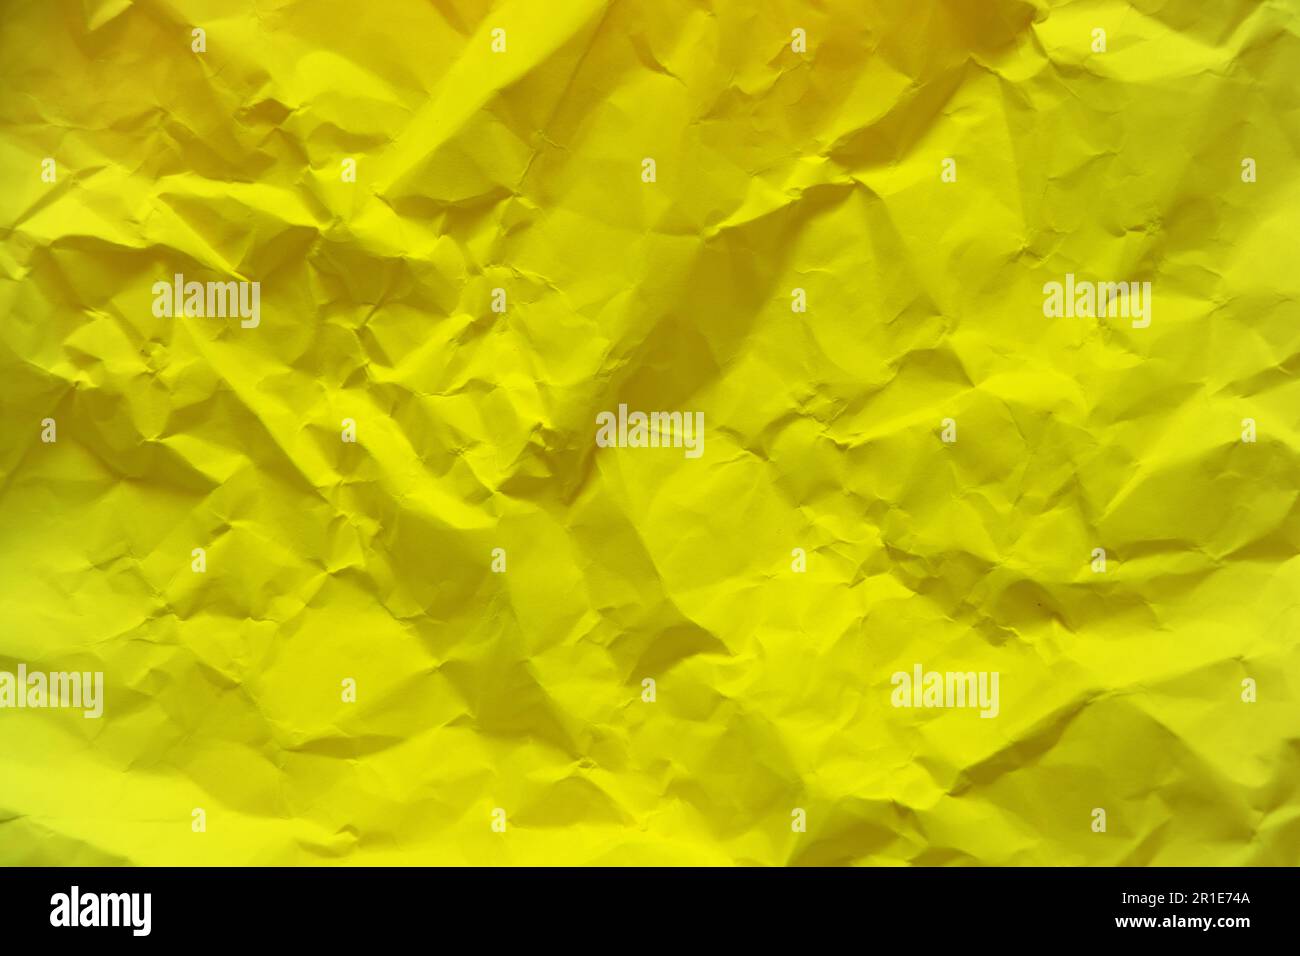 yellow crumpled paper as a background Stock Photo